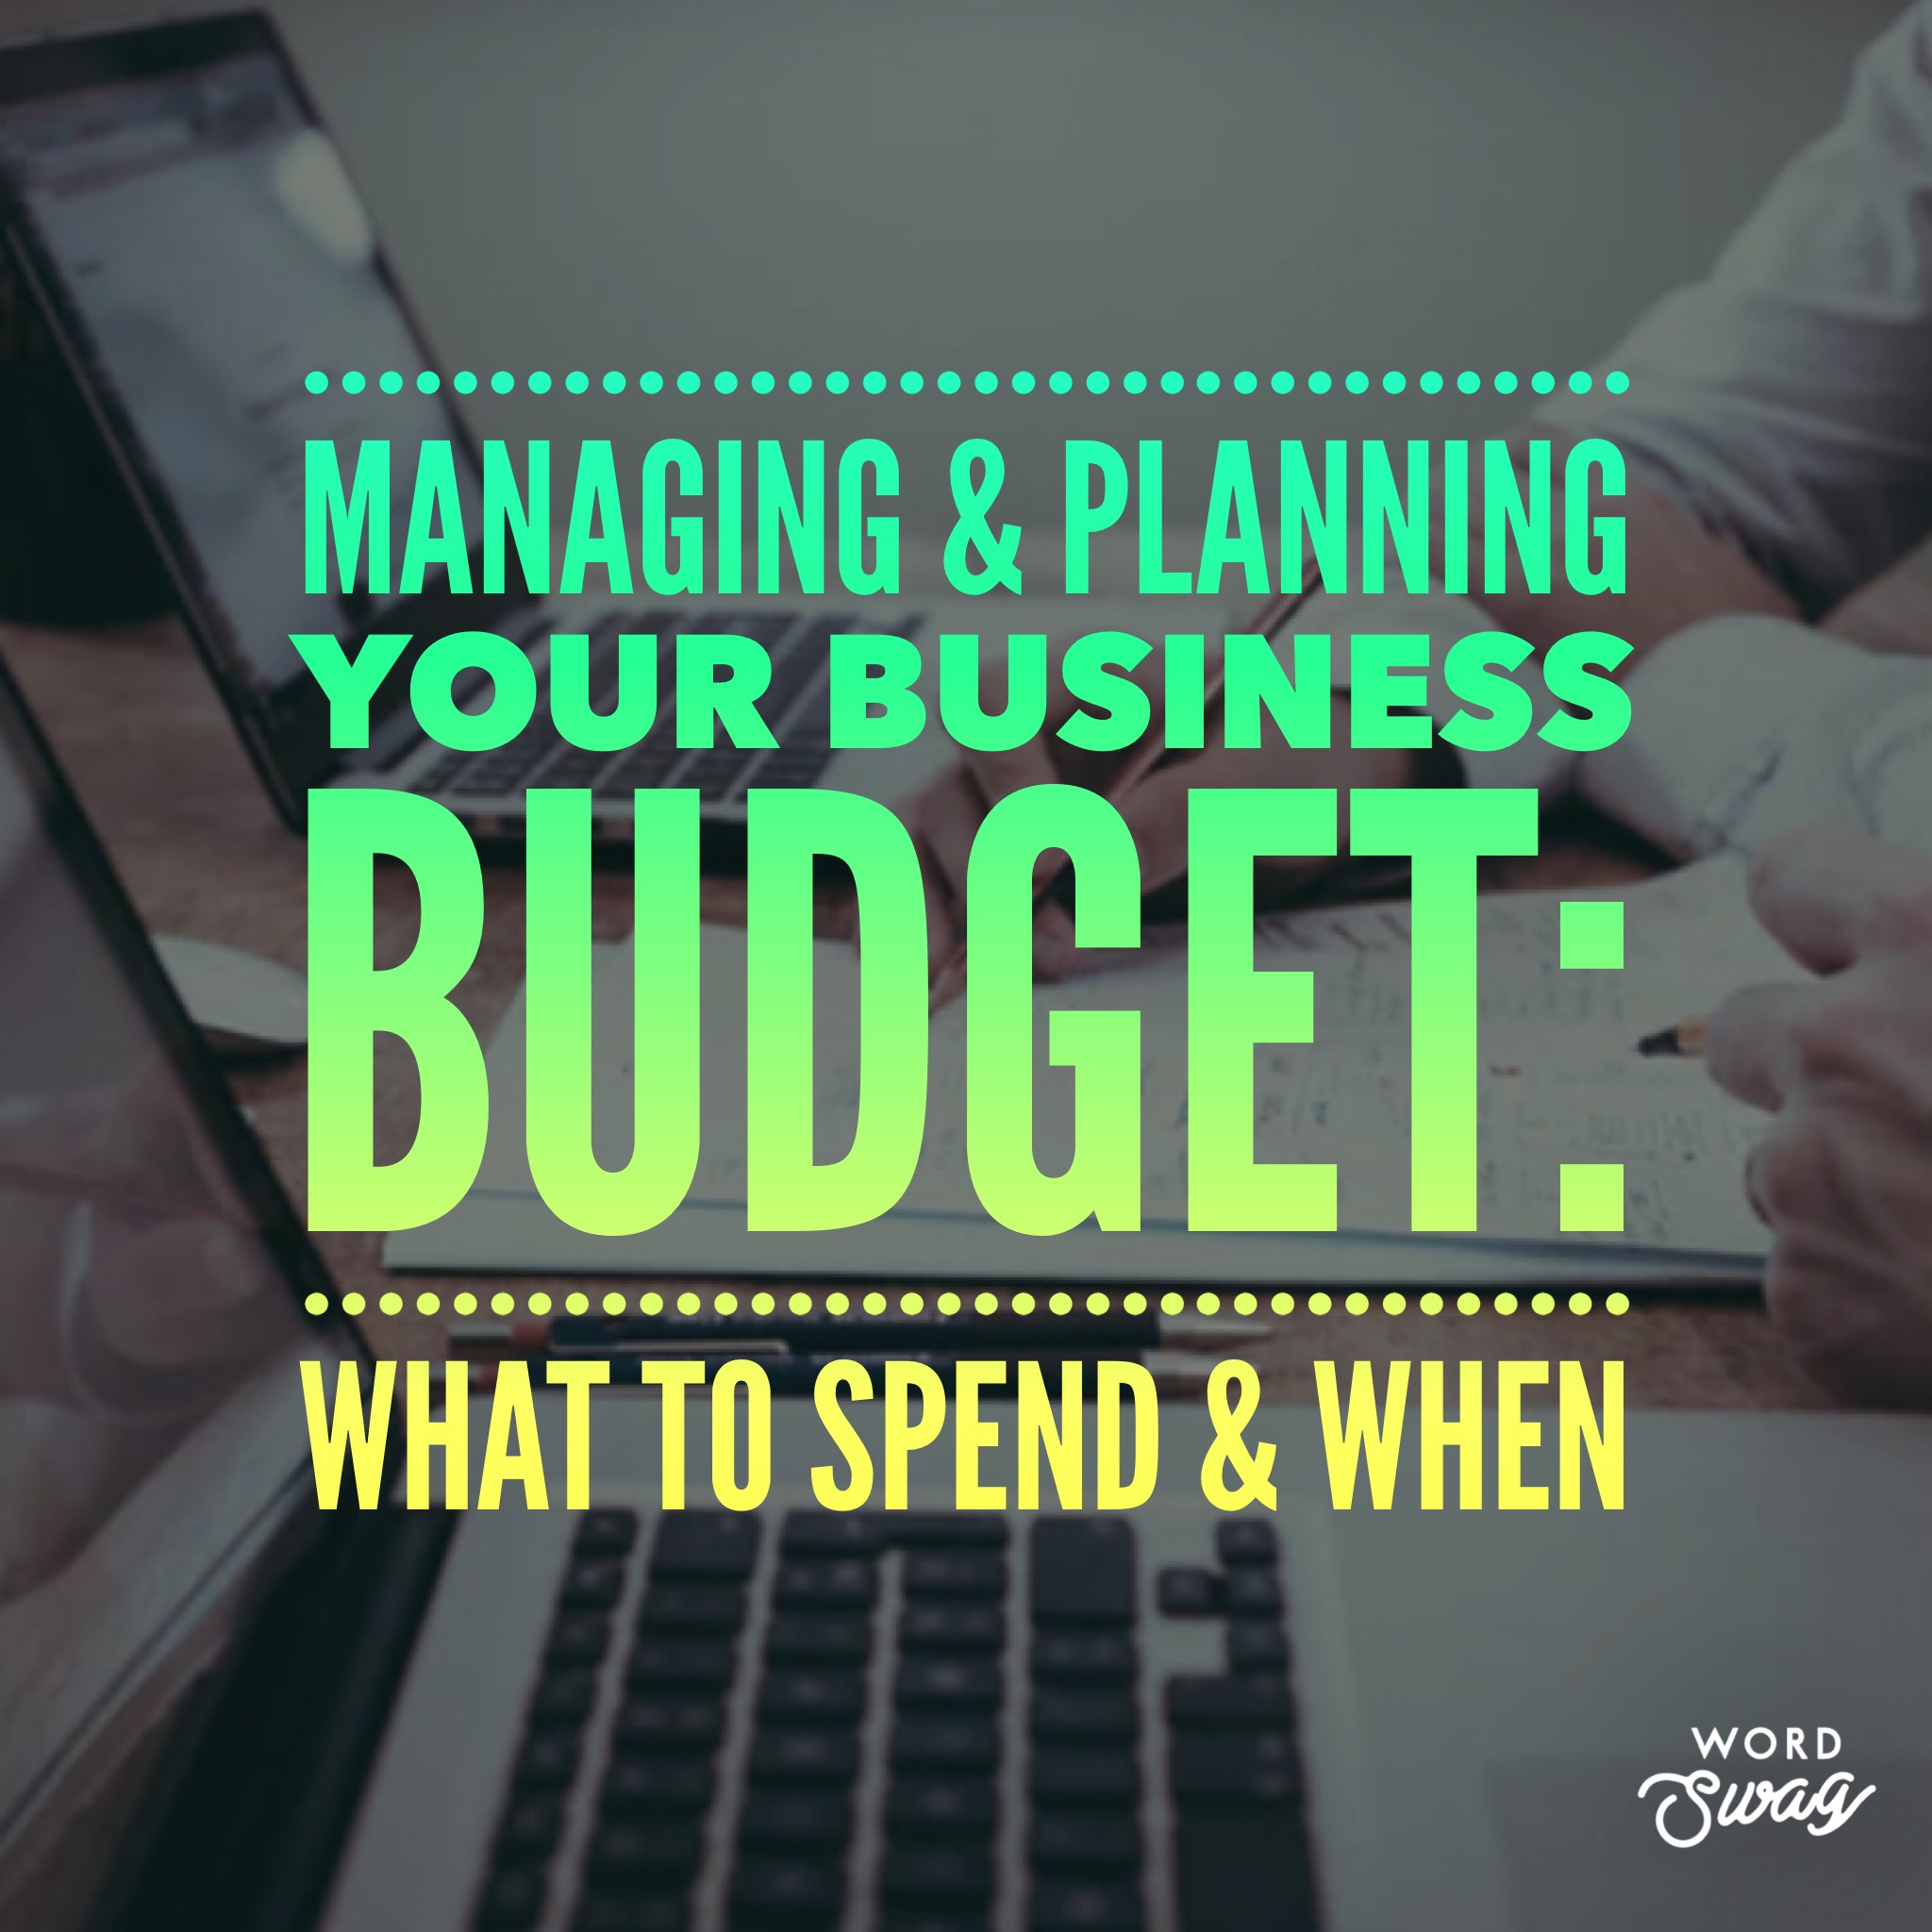 budget planning for business